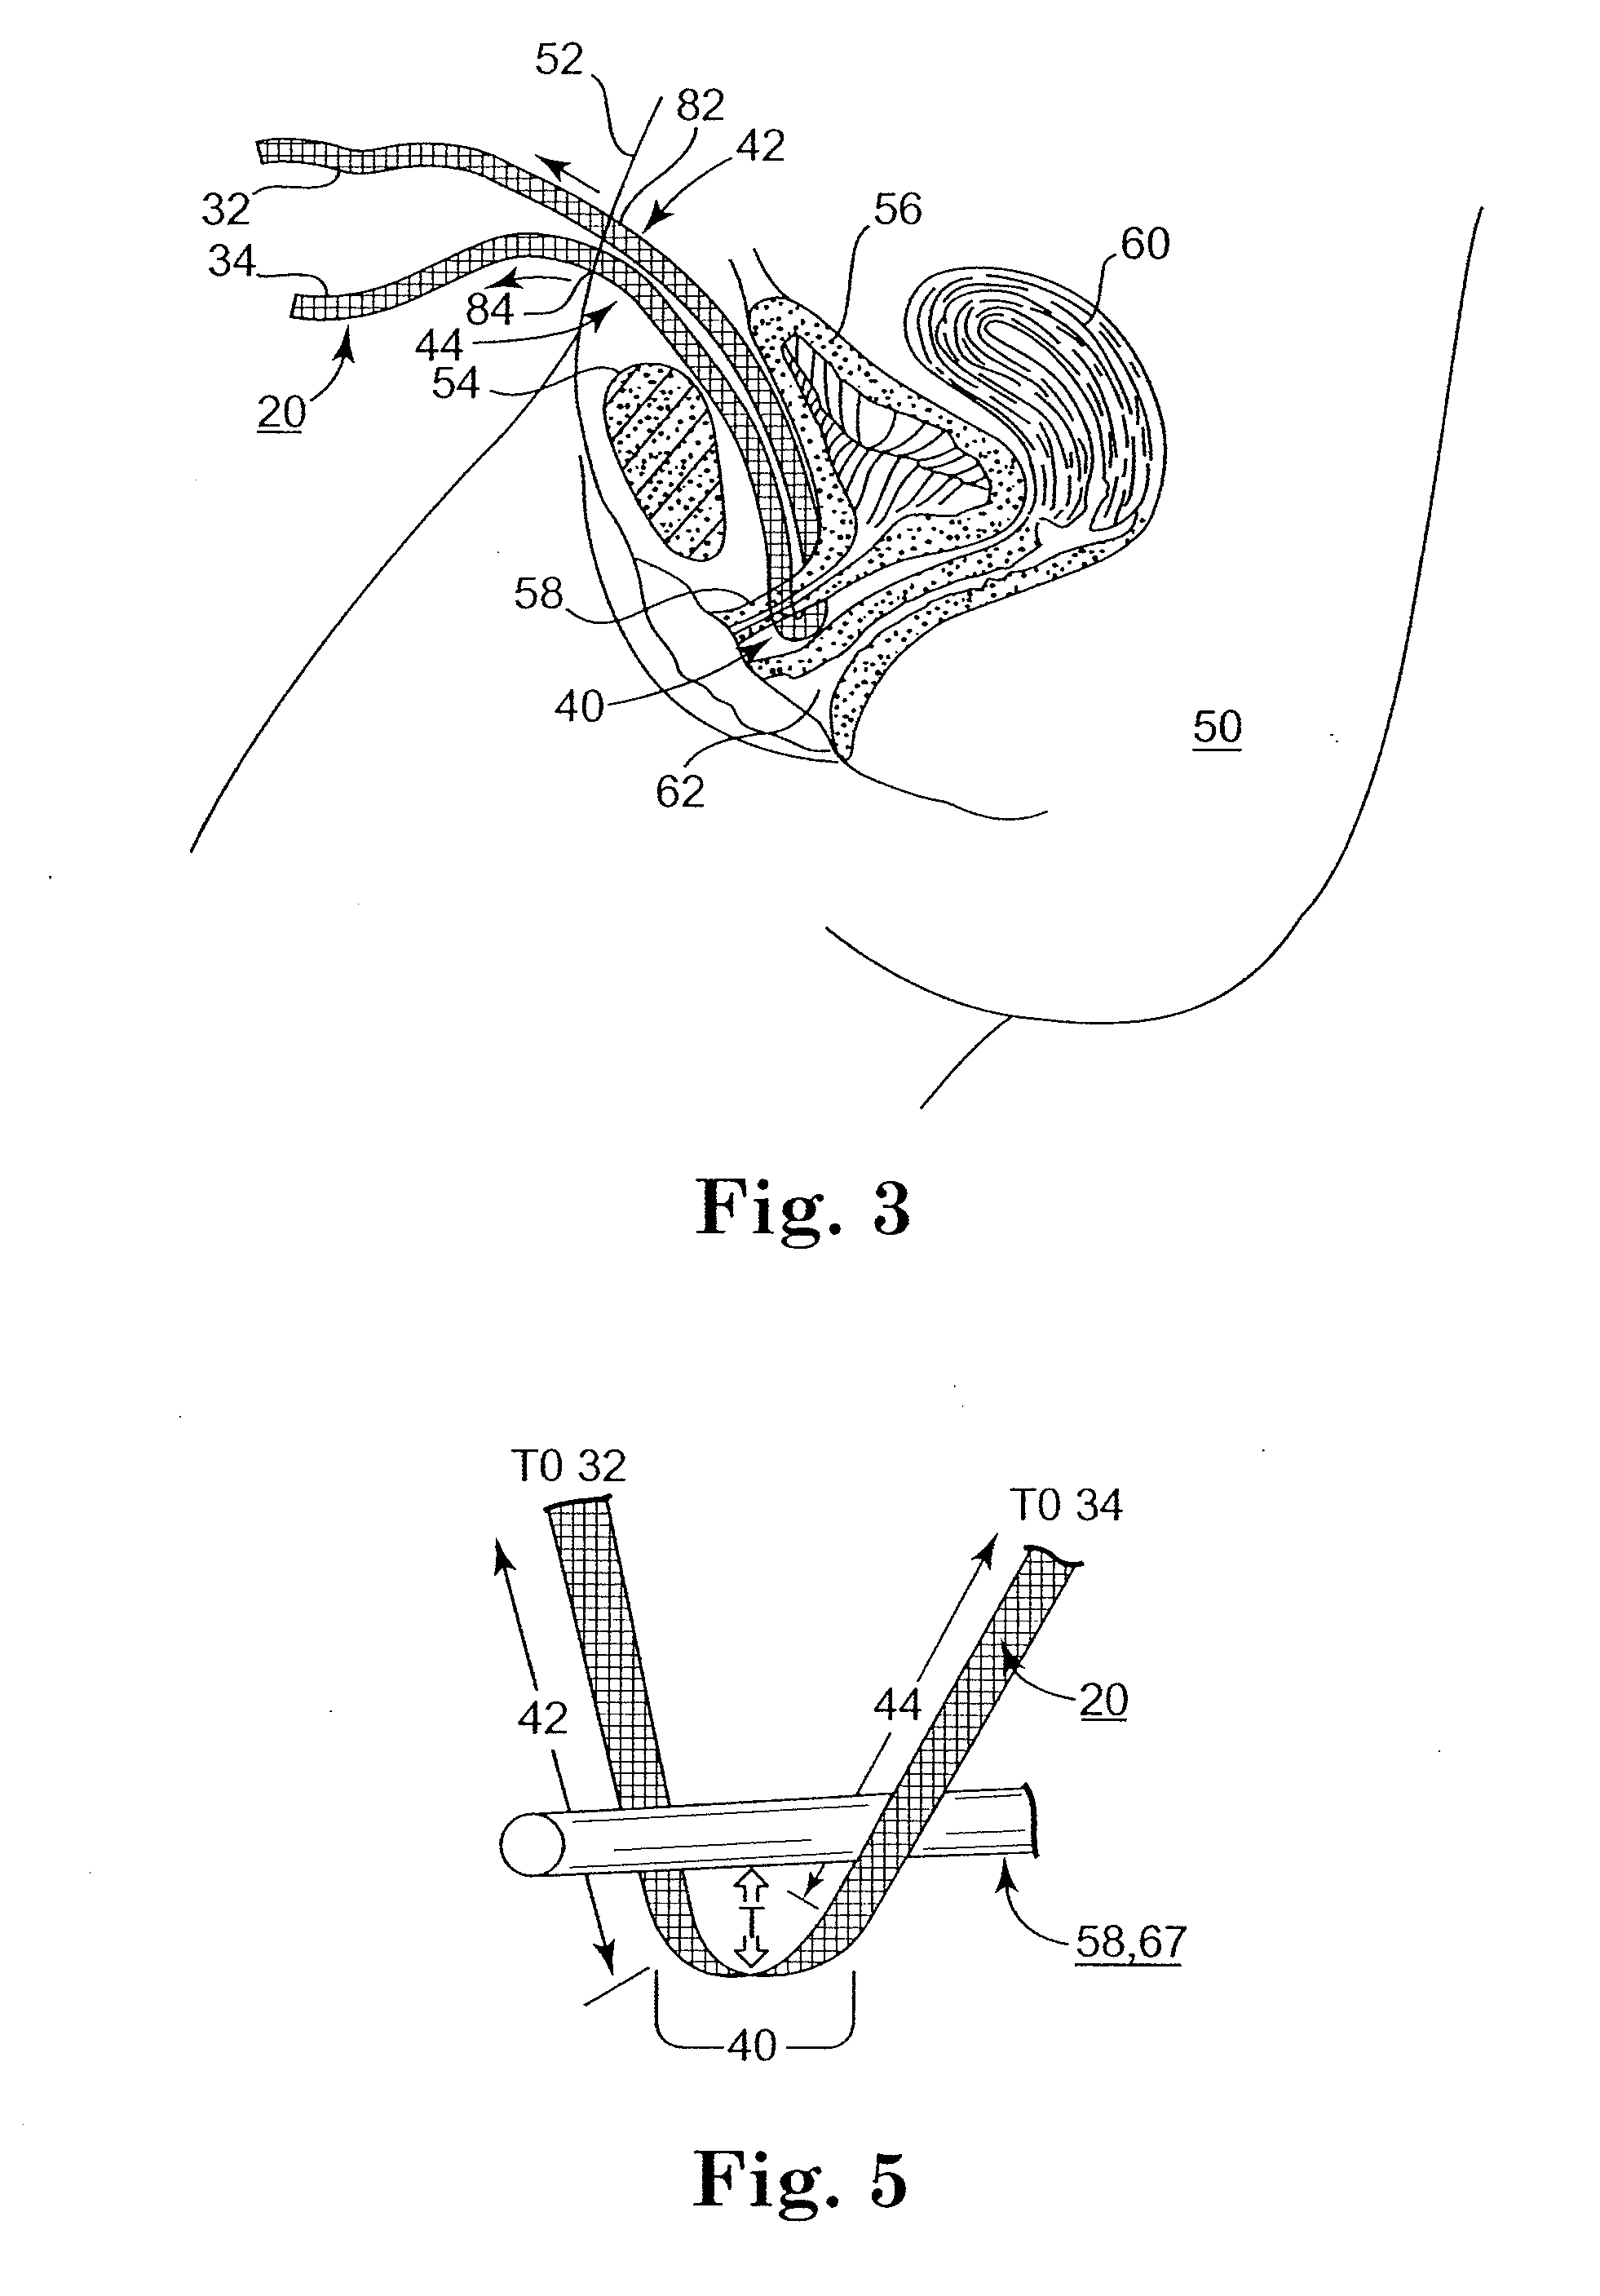 Adjustable Sling and Method of Treating Pelvic Conditions